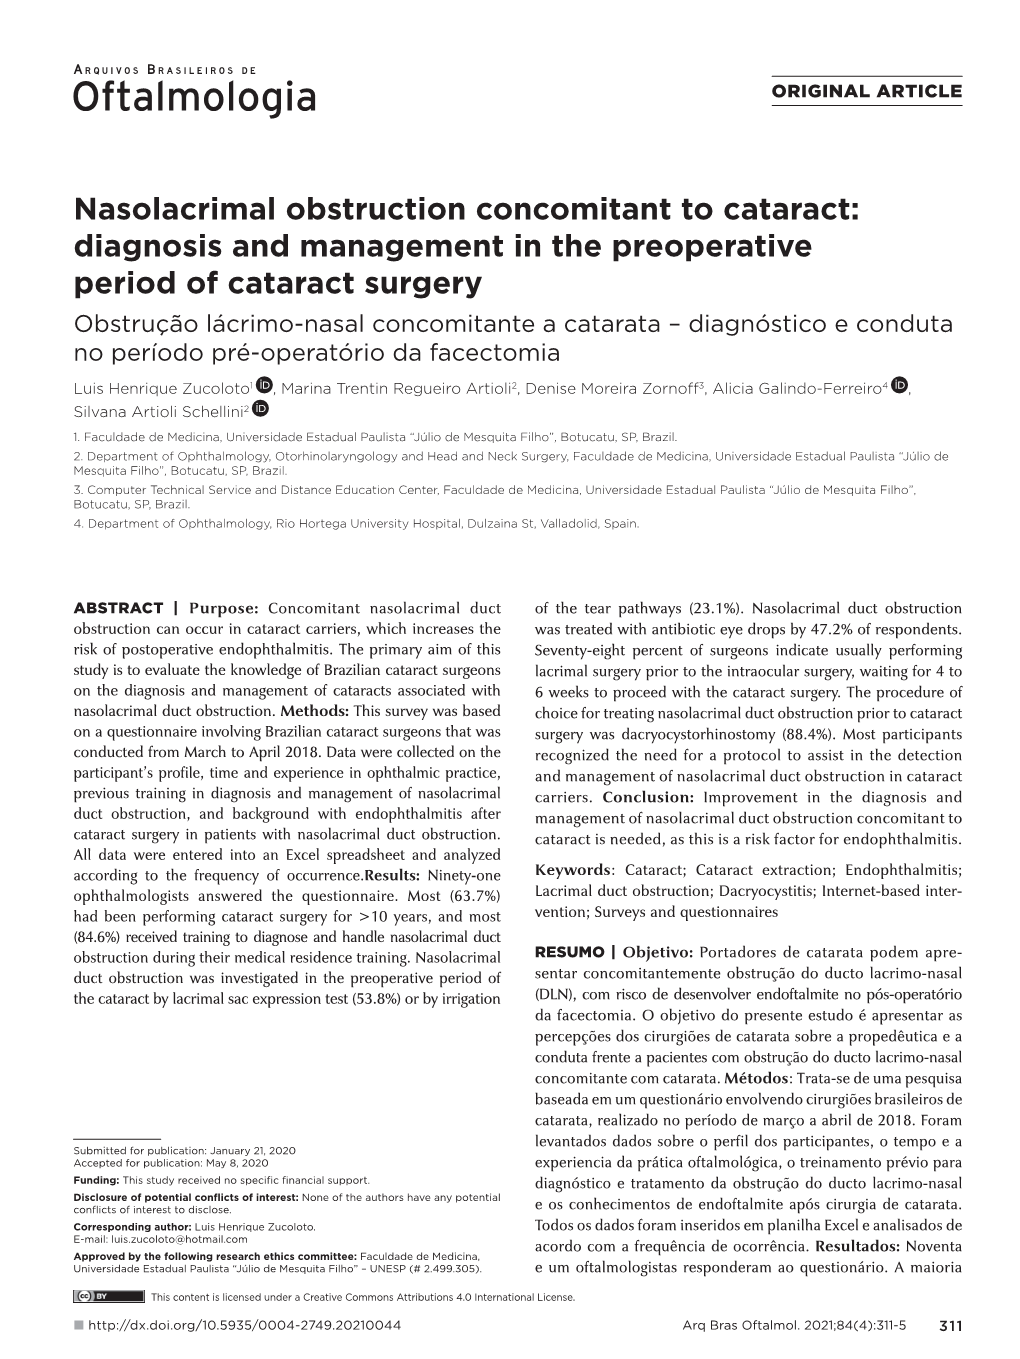 Nasolacrimal Obstruction Concomitant to Cataract: Diagnosis And